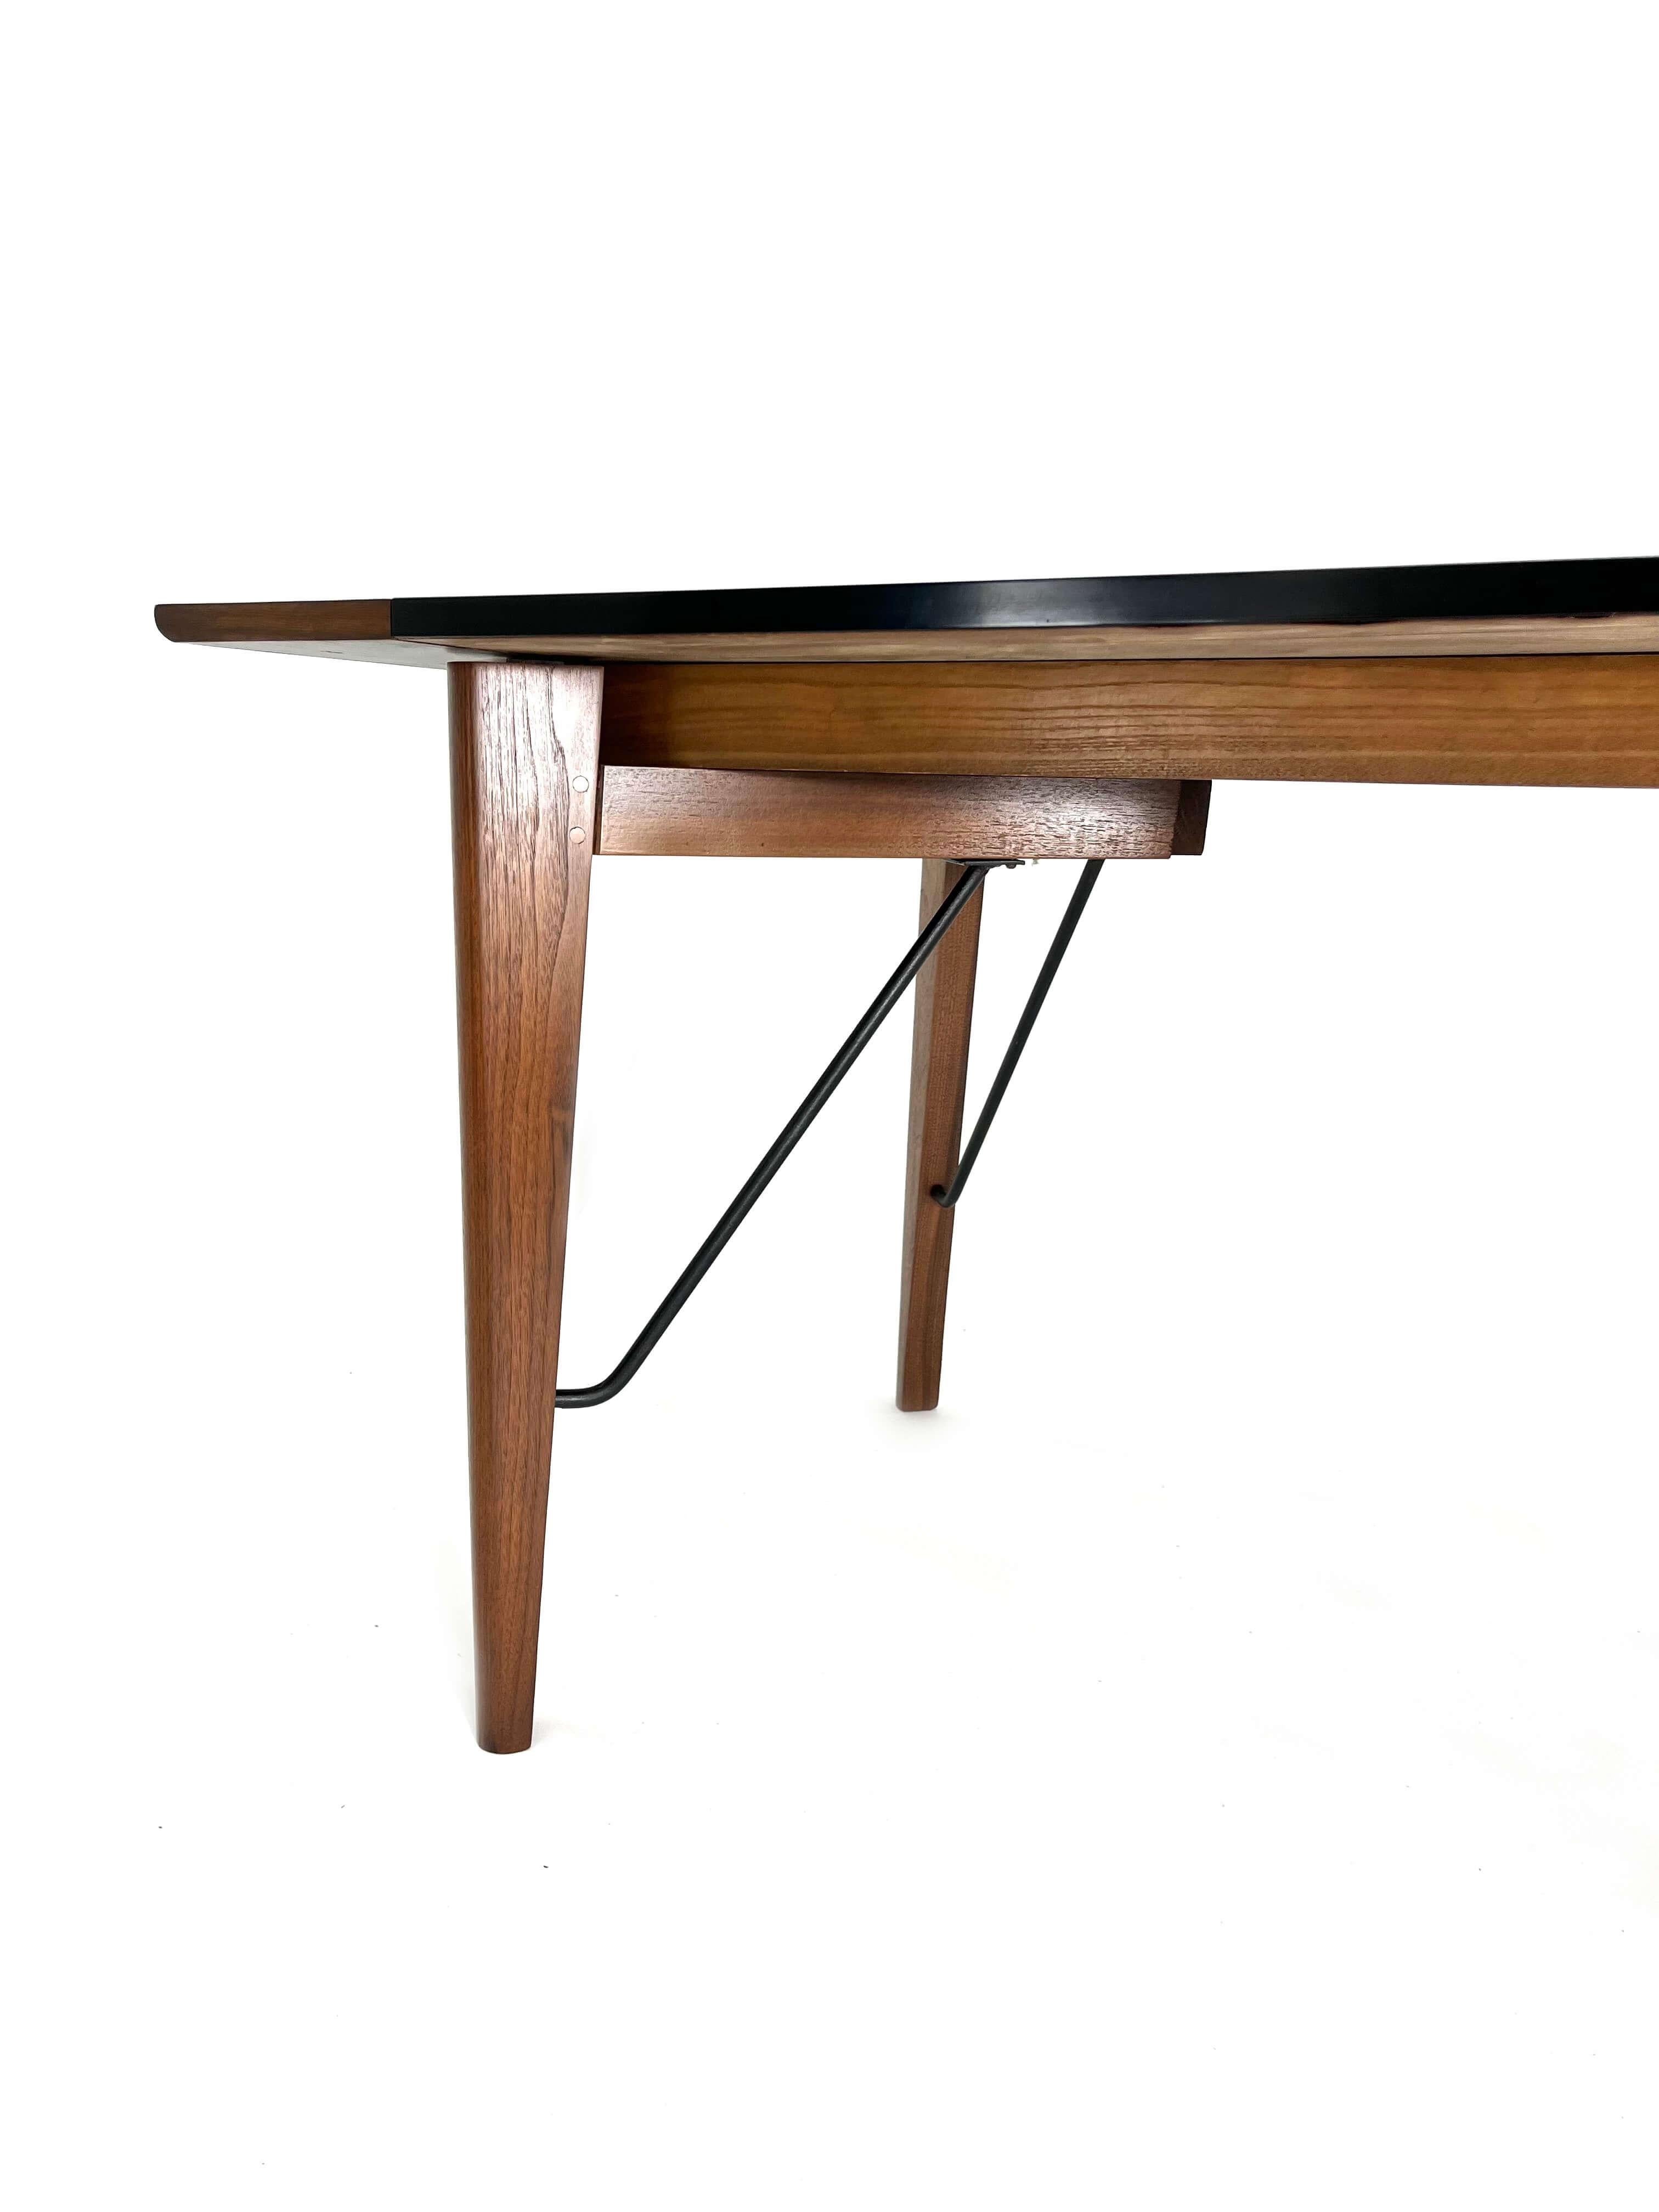 Greta Magnusson Grossman Dining Table for Glenn of California In Excellent Condition For Sale In San Diego, CA